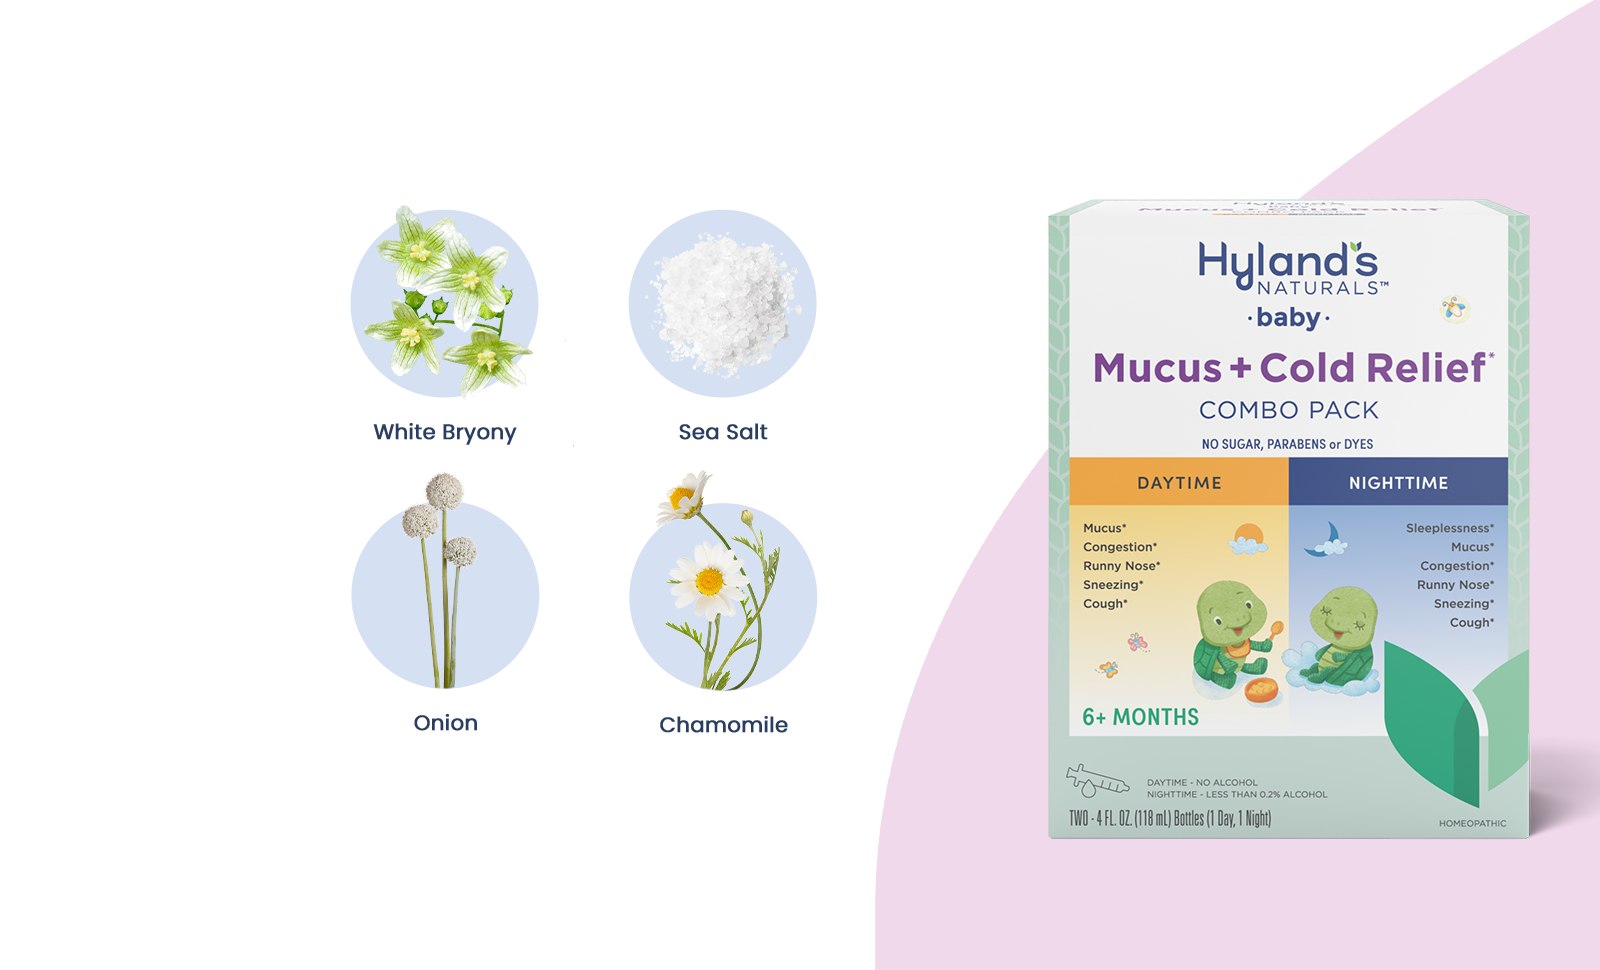 Baby Mucus + Cold Relief Combo Pack